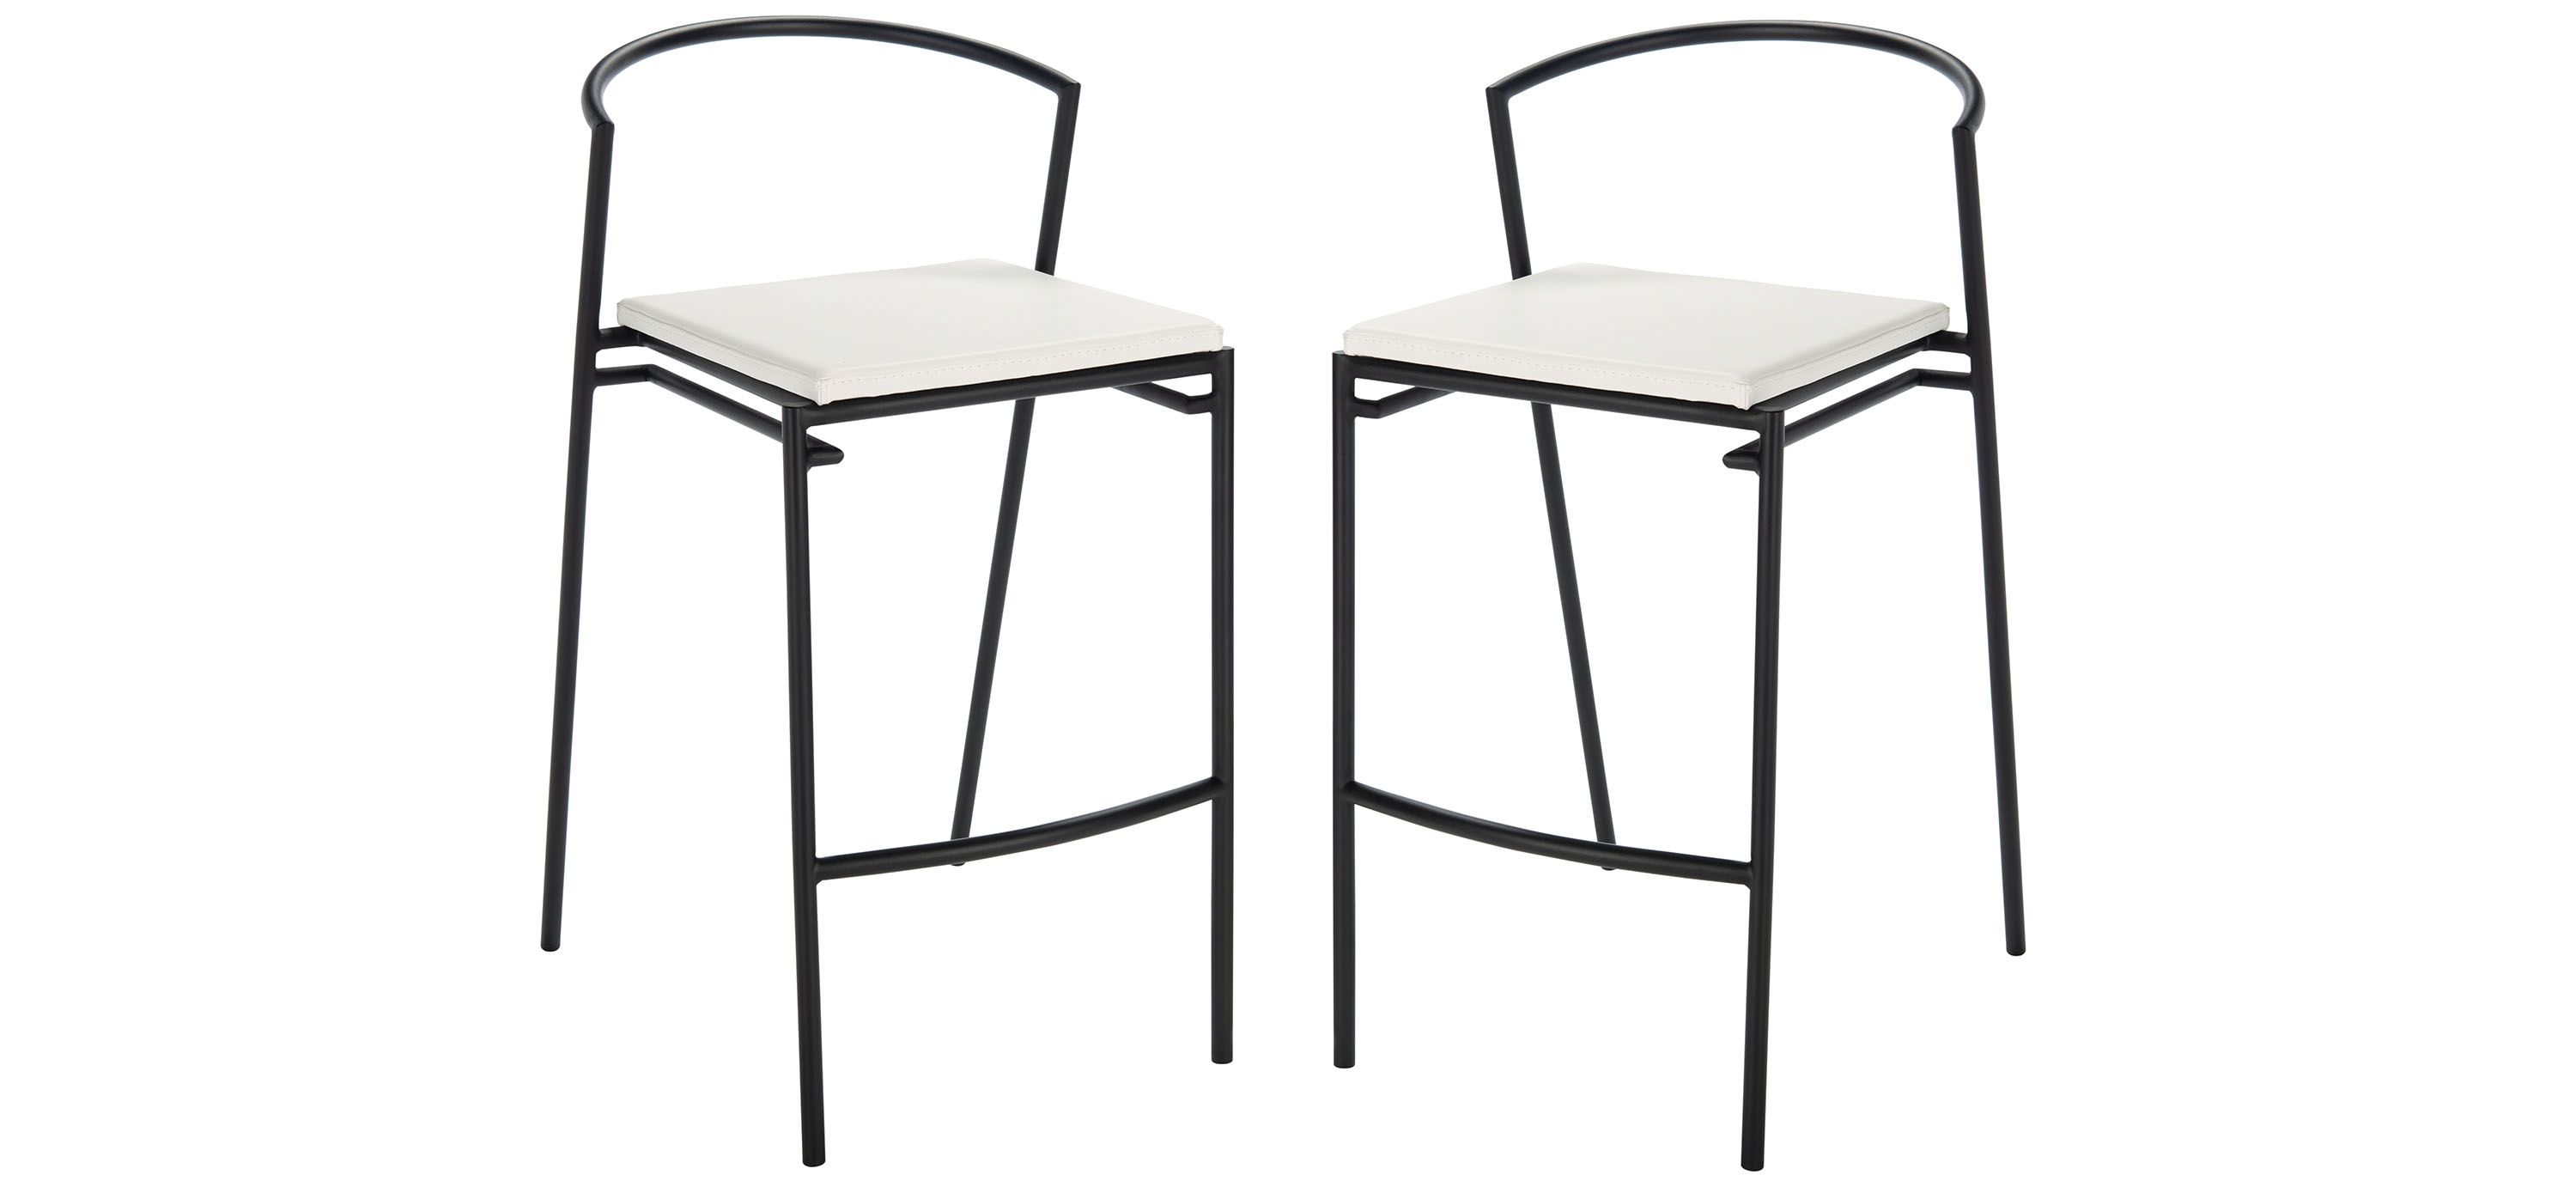 Benford Counter Stool - Set of 2